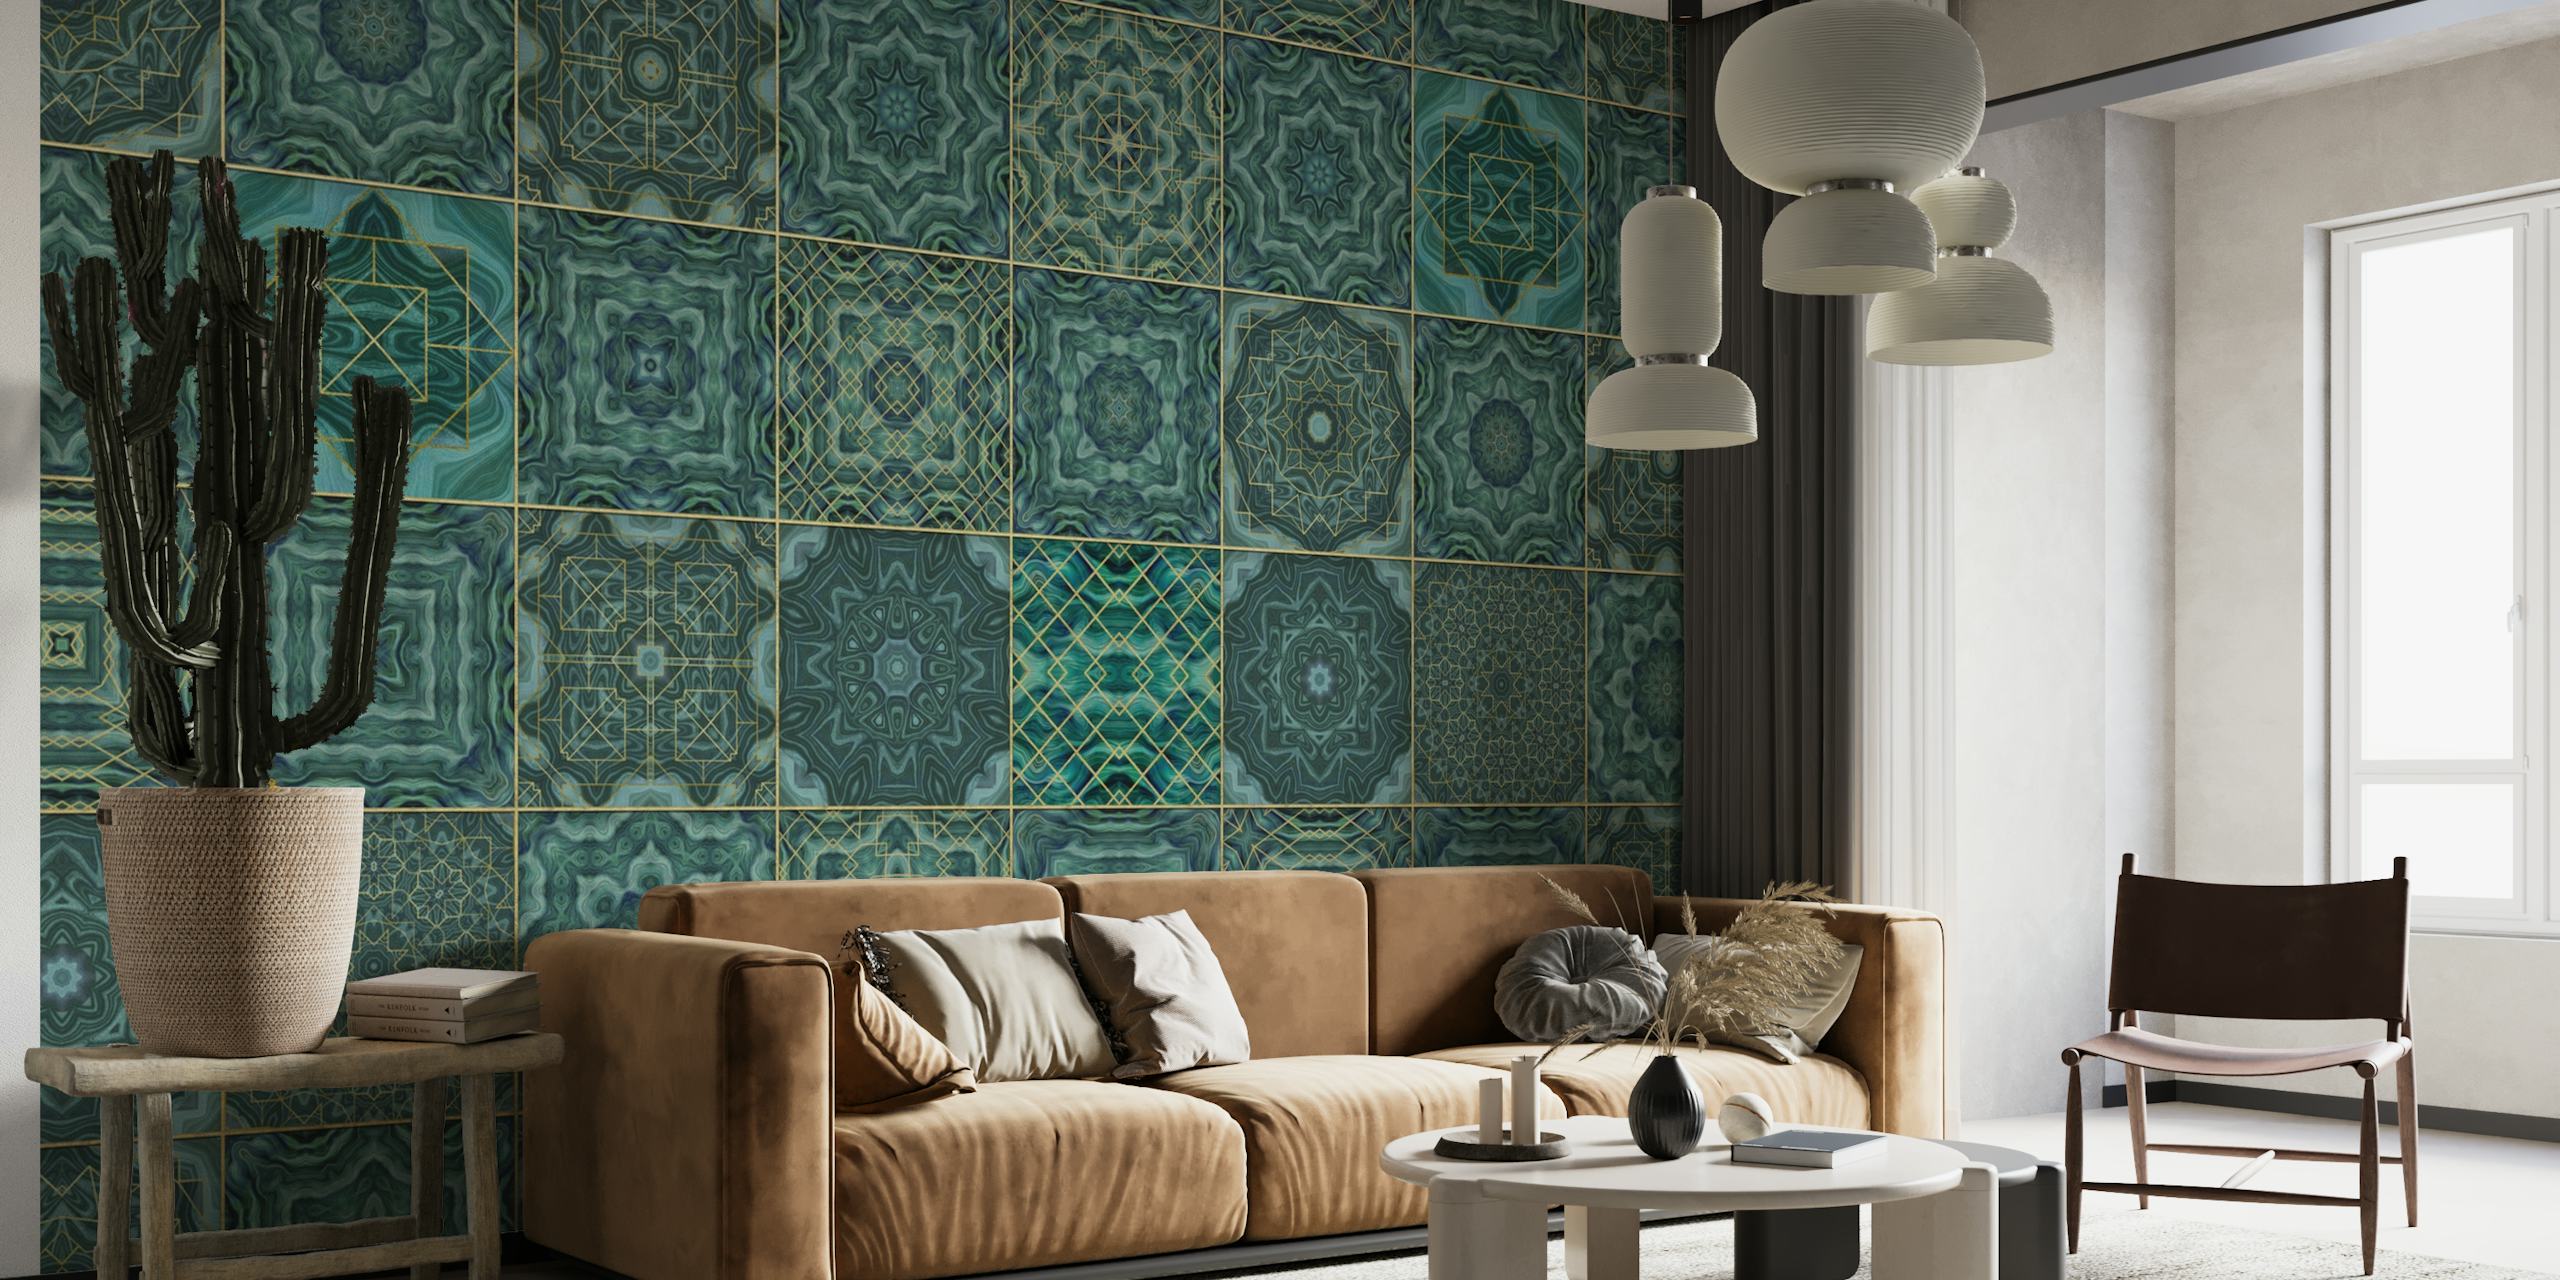 Vintage Teal Moroccan Tiles ταπετσαρία